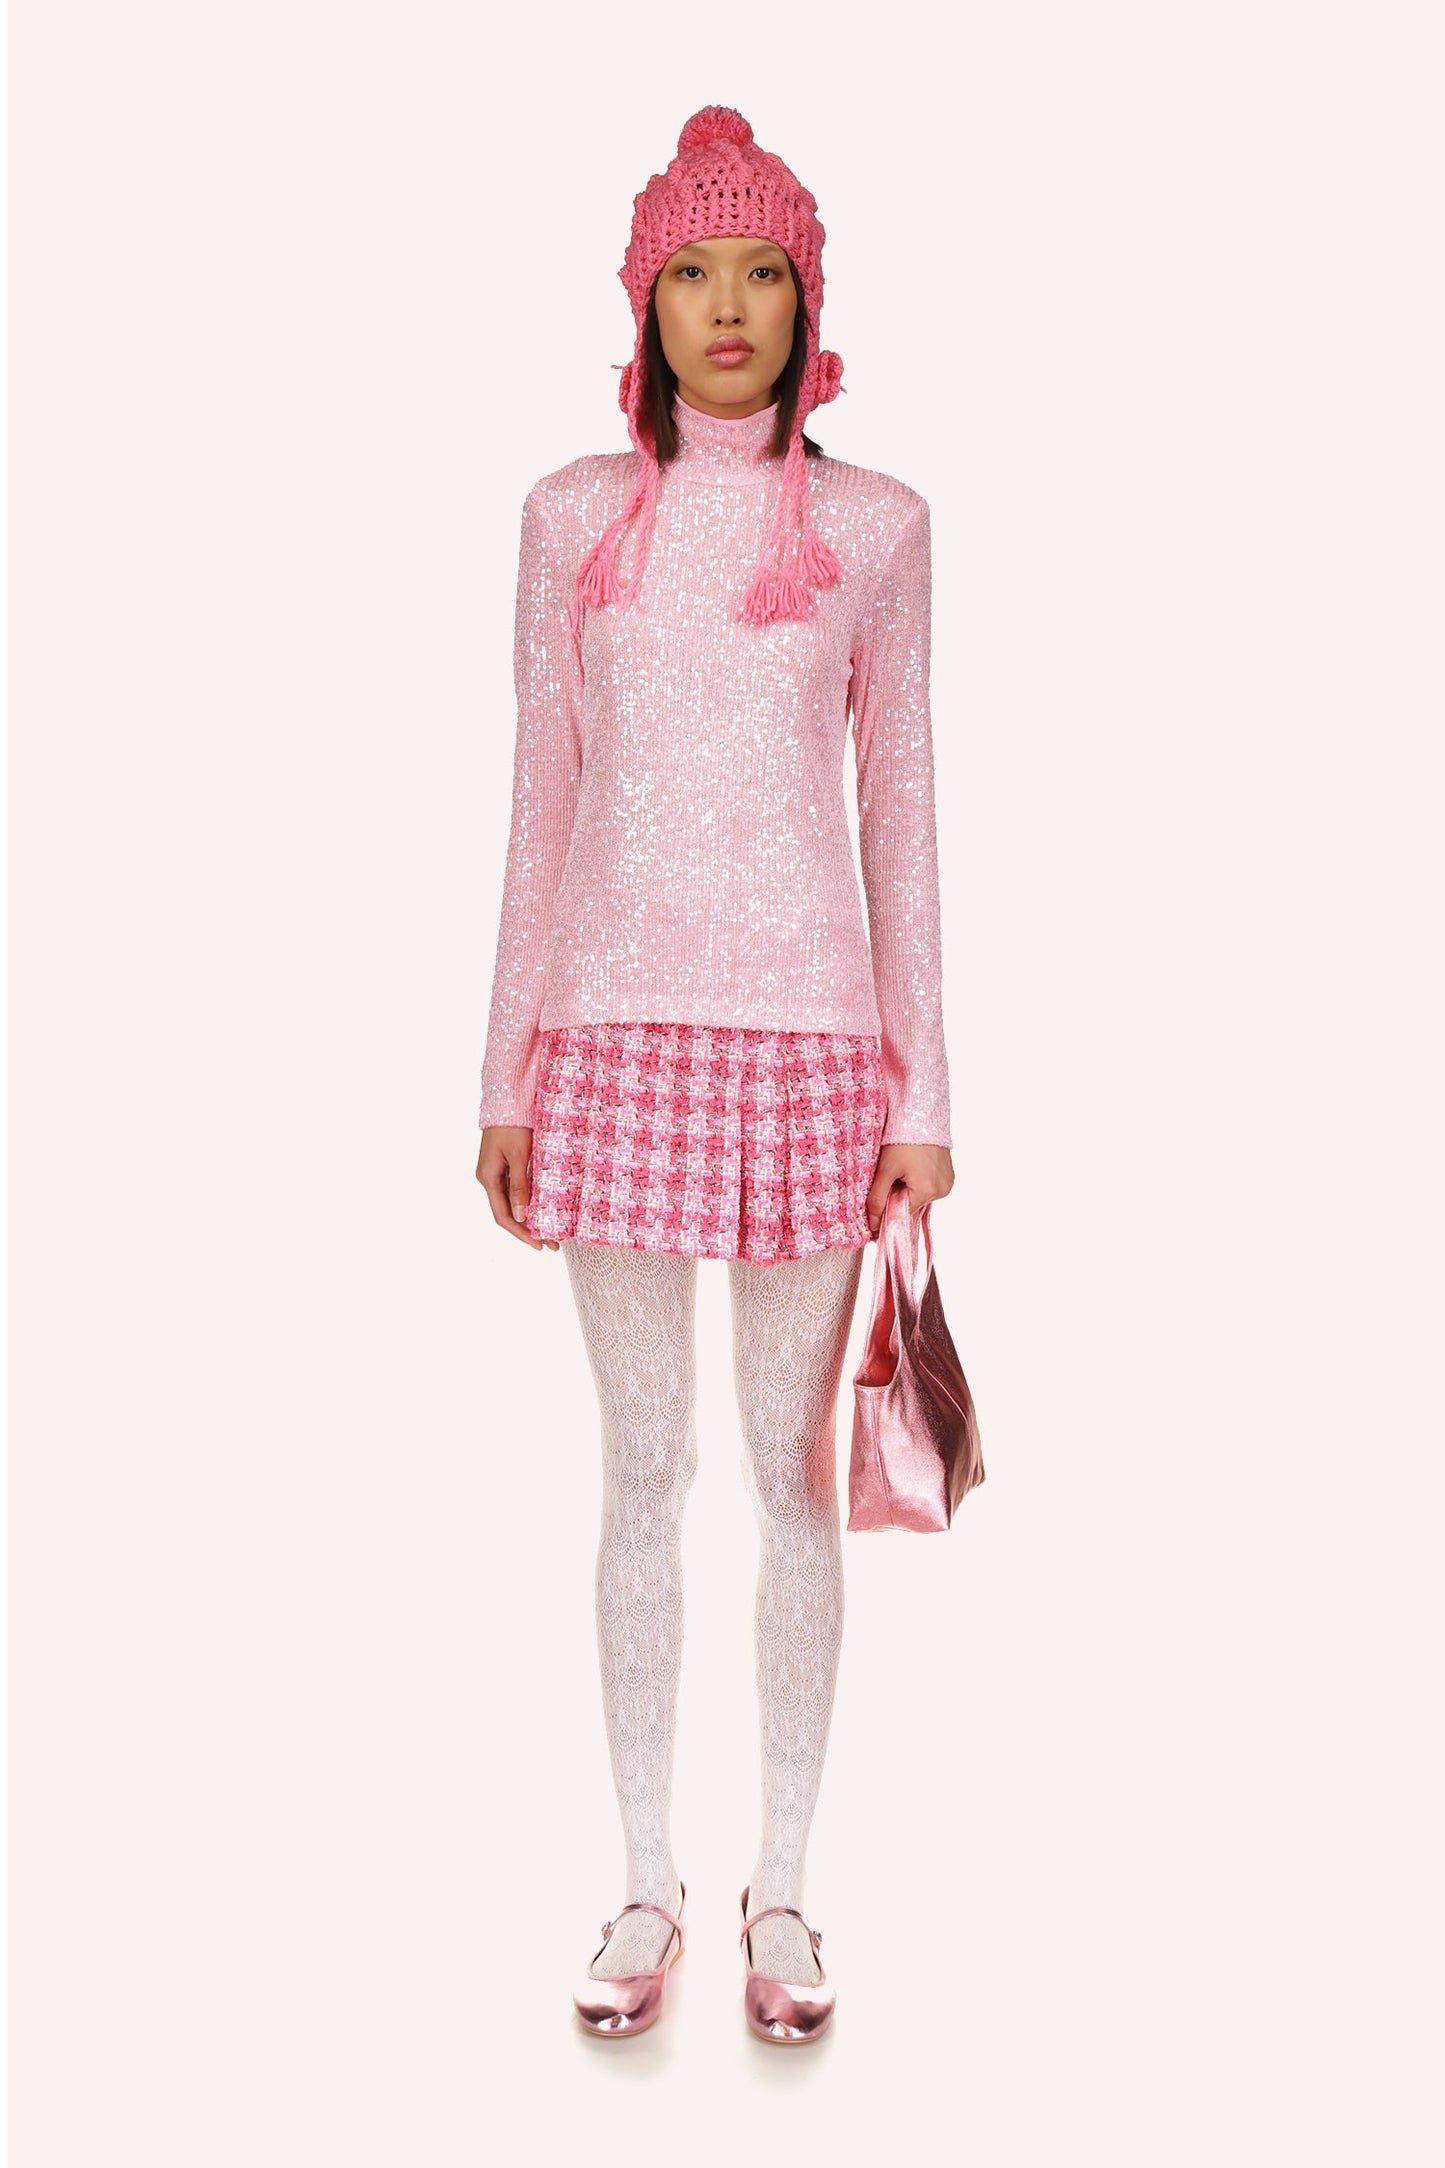 Sequin Mesh Turtleneck in Baby Pink beautifully accentuates the neckline while elongating the hips